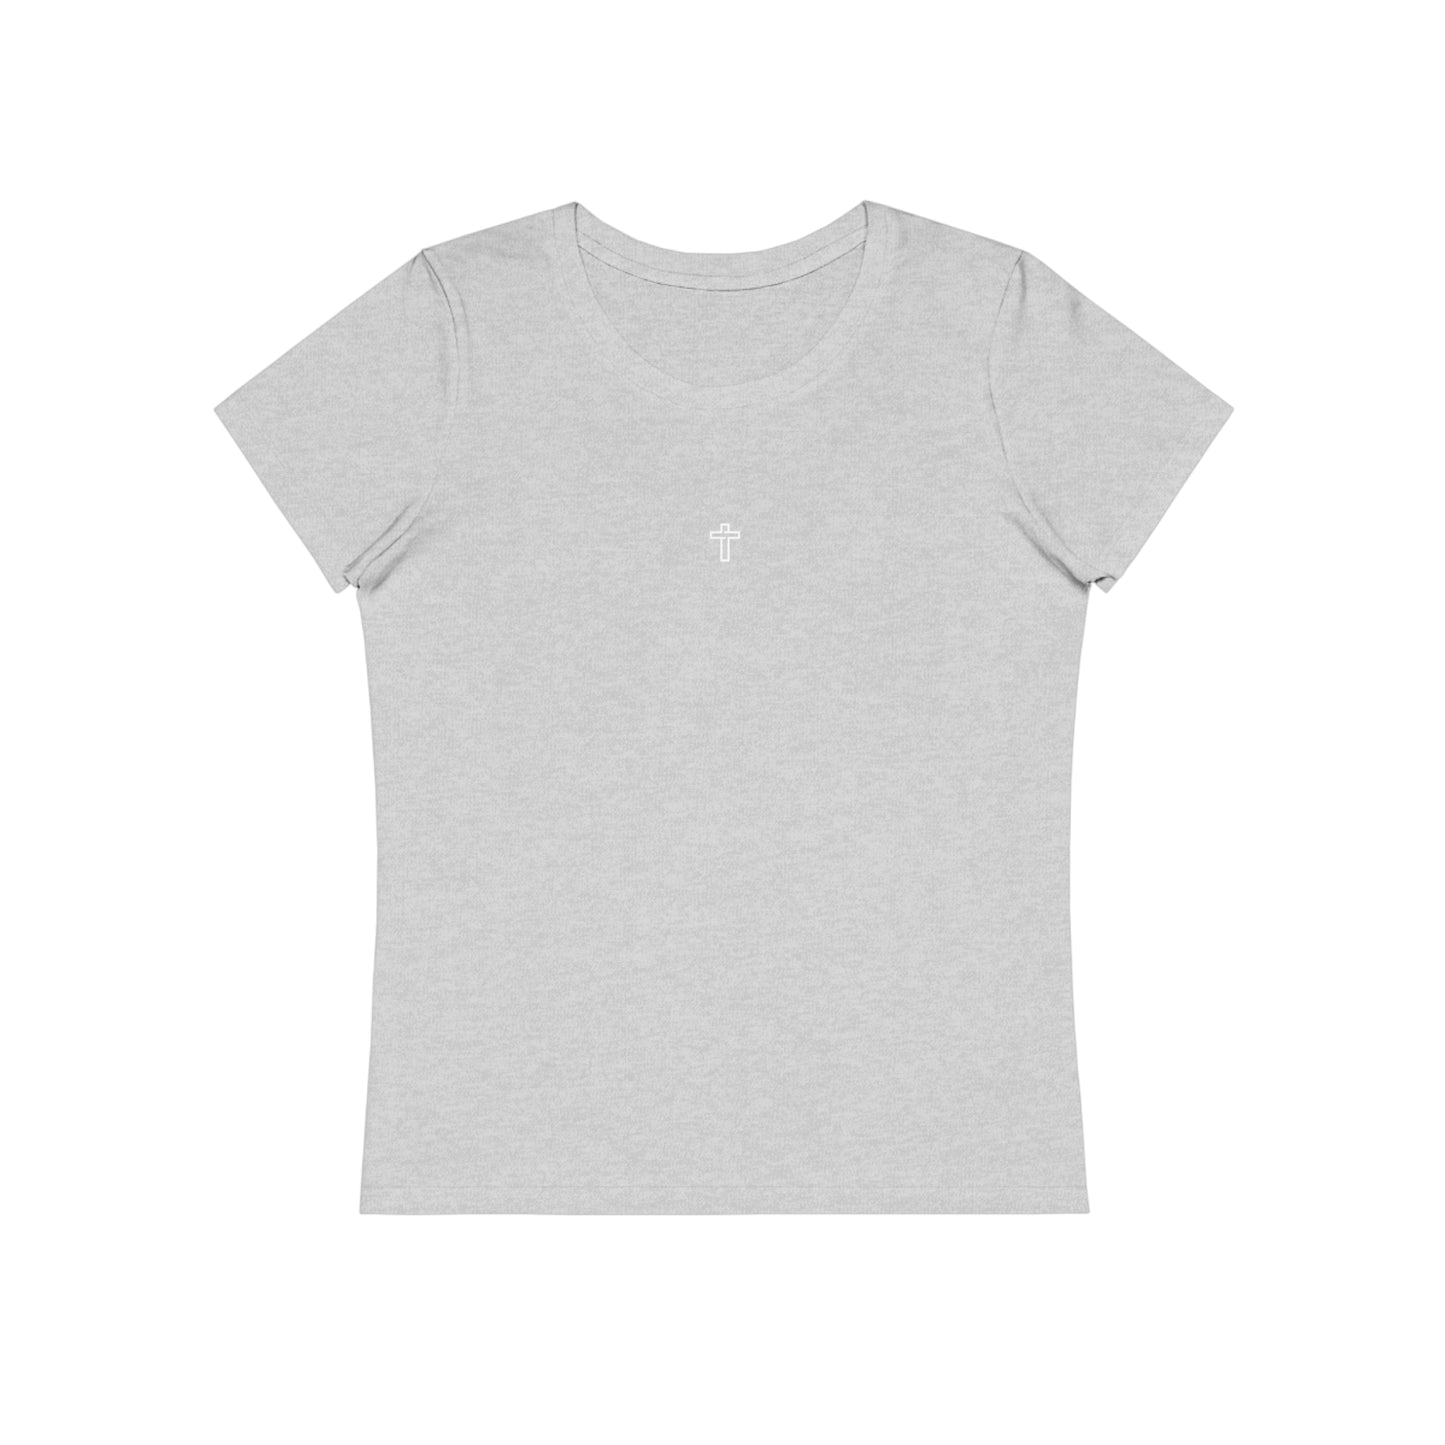 Cross-icon Women's Fitted T